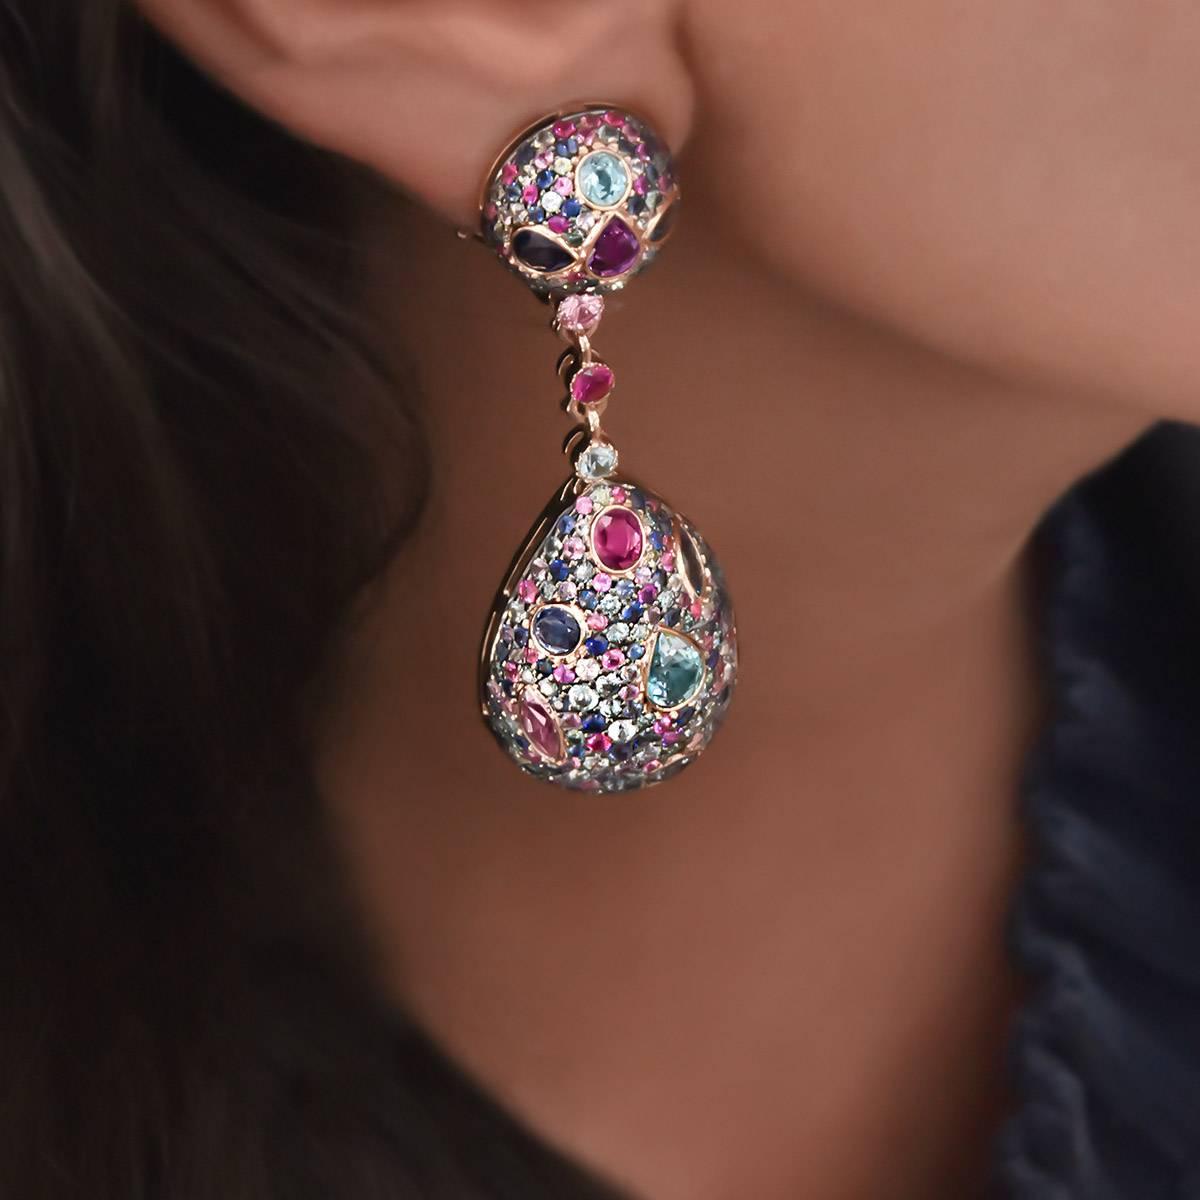 These stunning Zorab creations drop earrings are set in 18 karat rose gold and feature pave multi color sapphires inlaid with bezel set fancy shaped sapphires and blue topaz. 
Specifics:
Brown diamonds .64 carats
Sapphires 5.09 carats. 
Fancy Cut